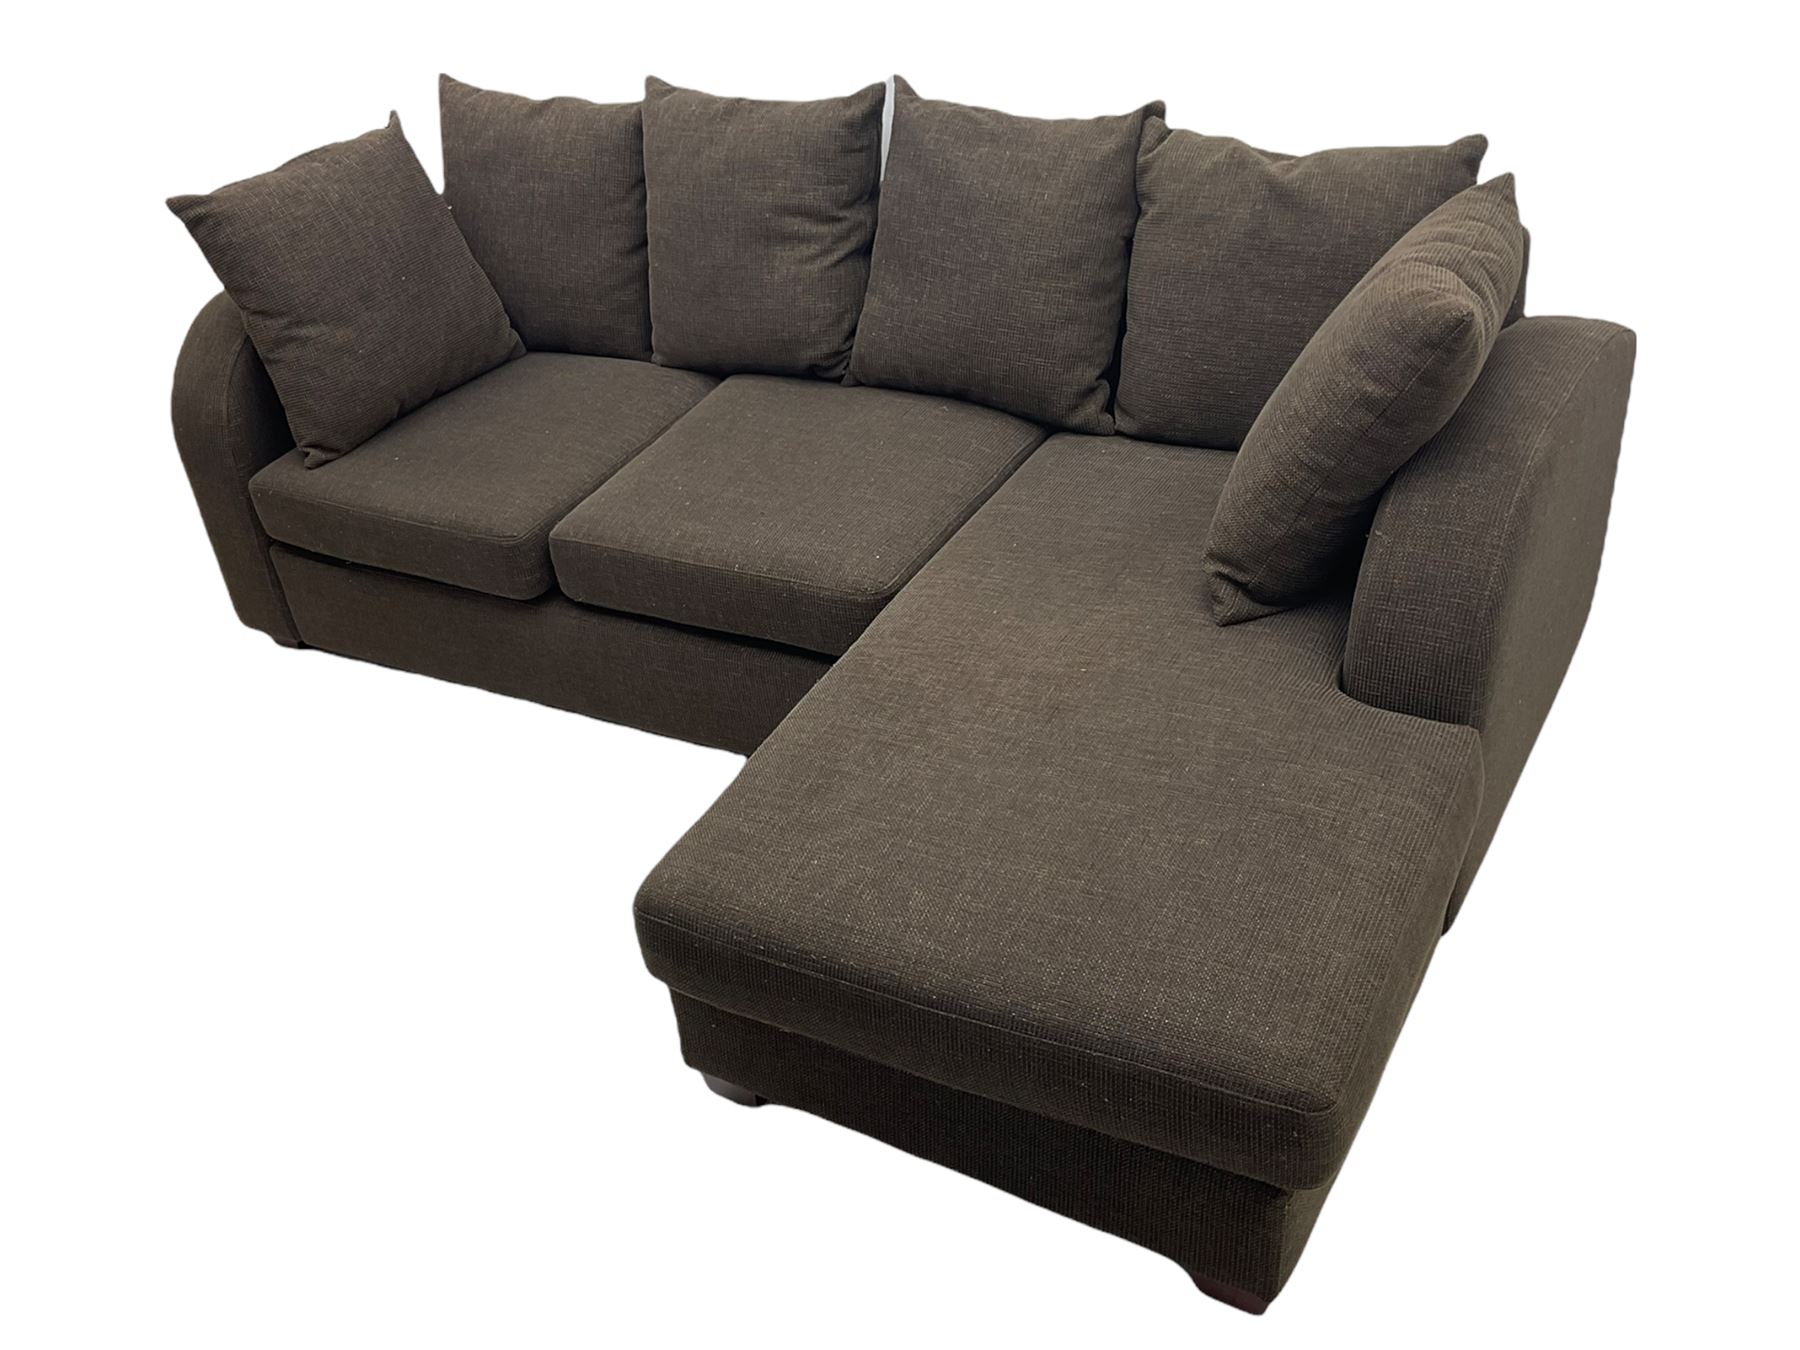 Corner sofa with right hand chaise - Image 4 of 8